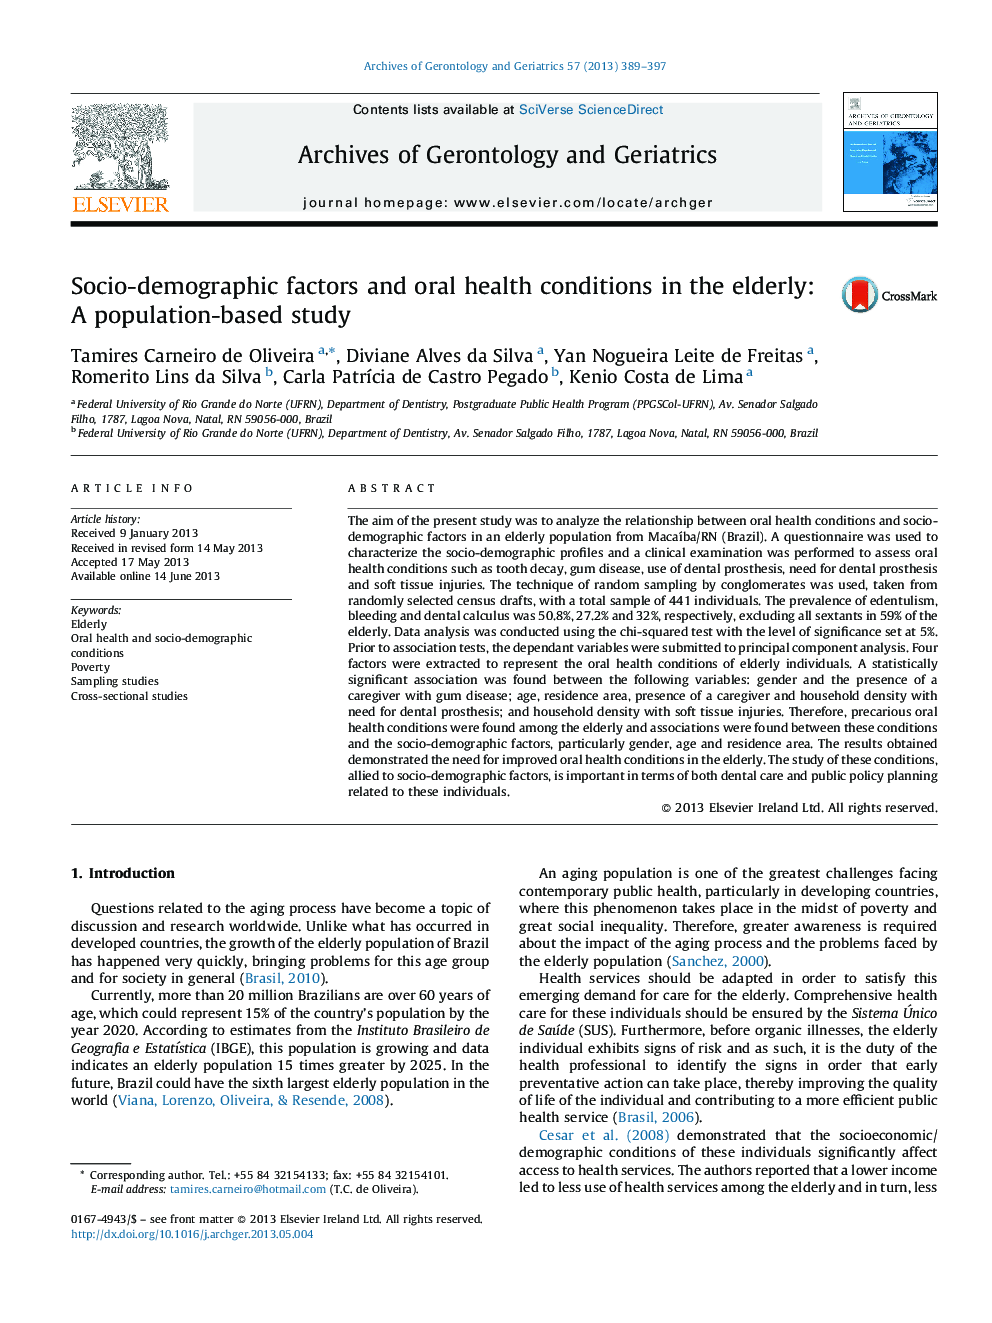 Socio-demographic factors and oral health conditions in the elderly: A population-based study